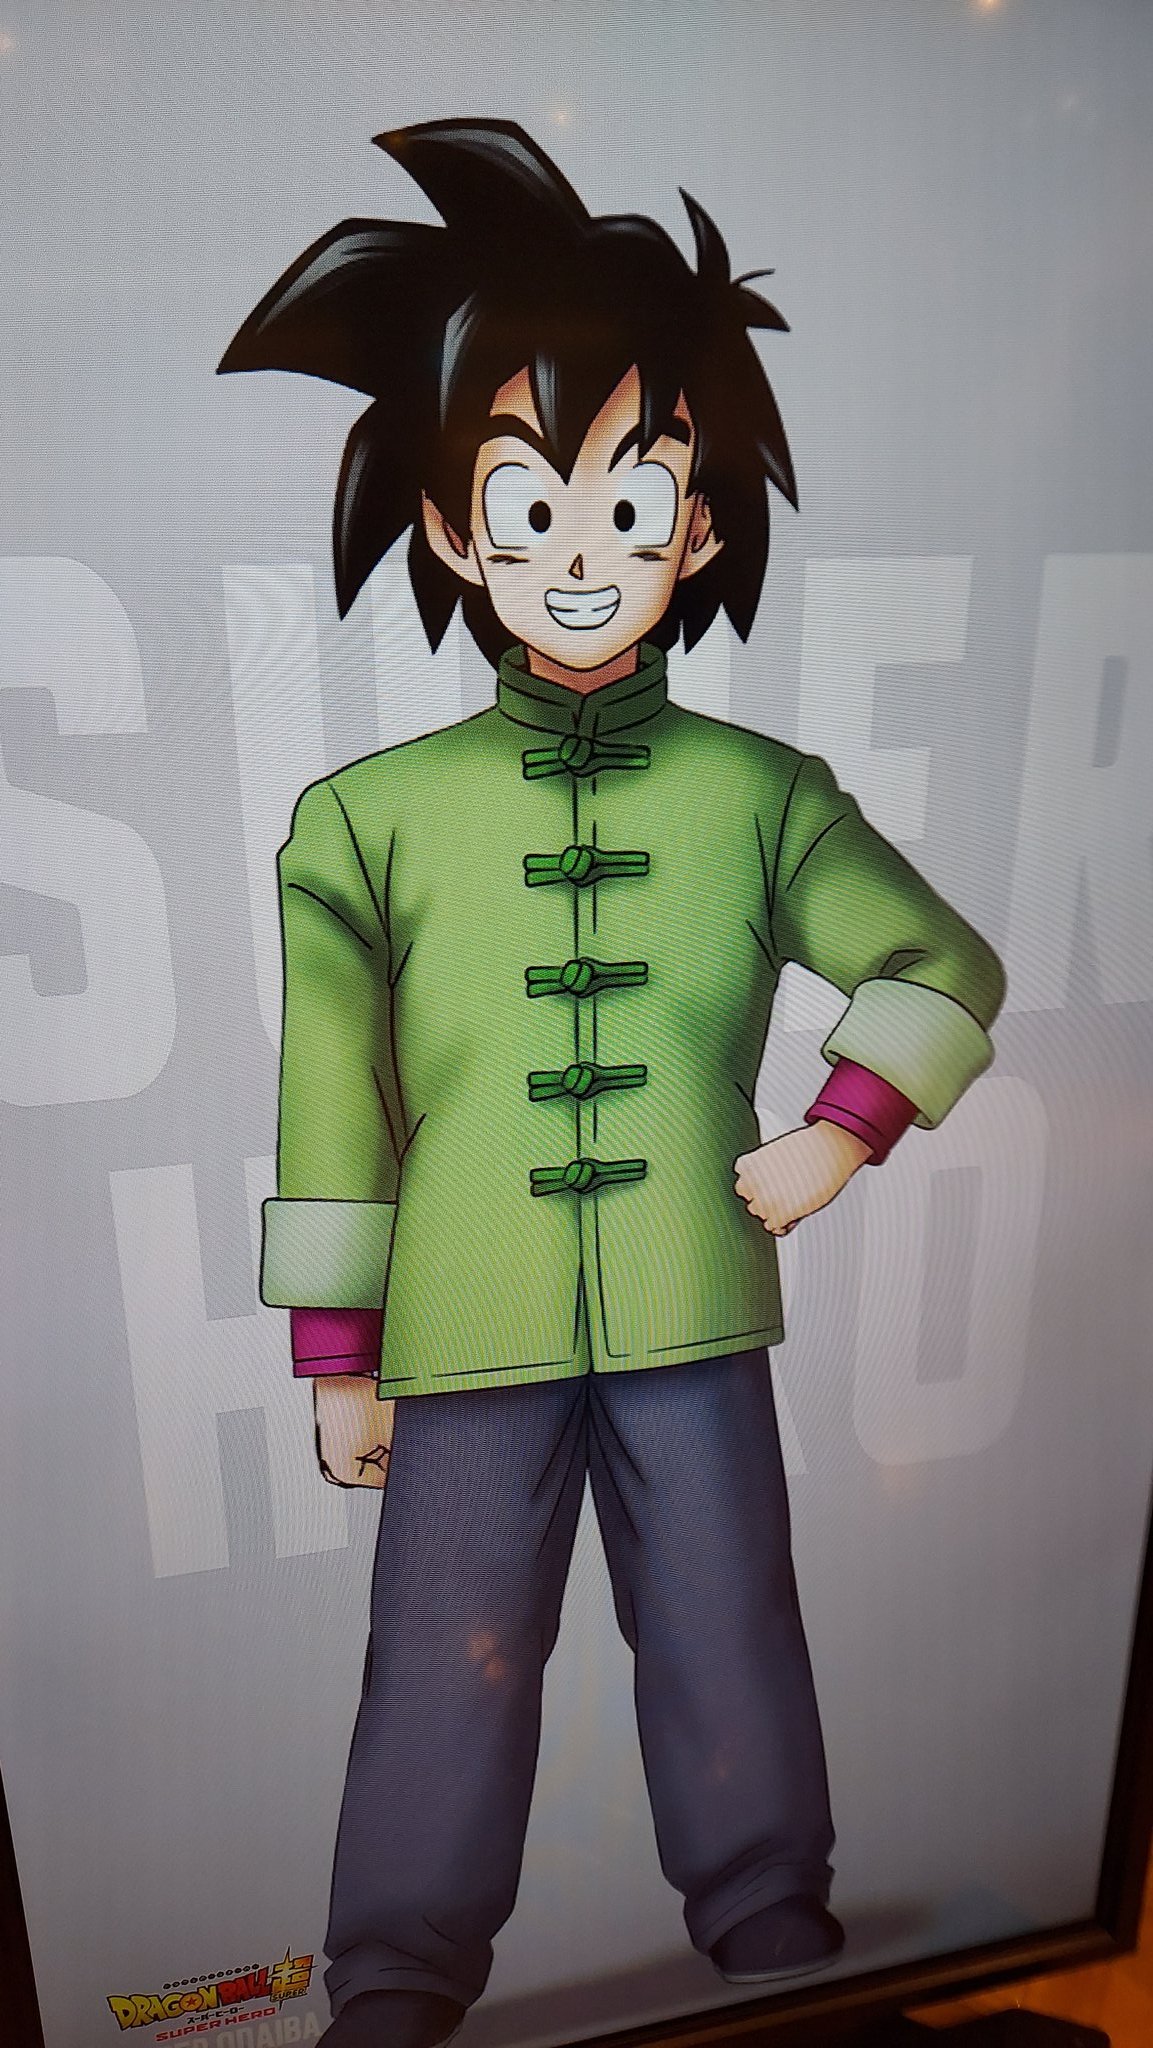 New Dragon Ball Super: Broly Character Posters Confirm Goten And